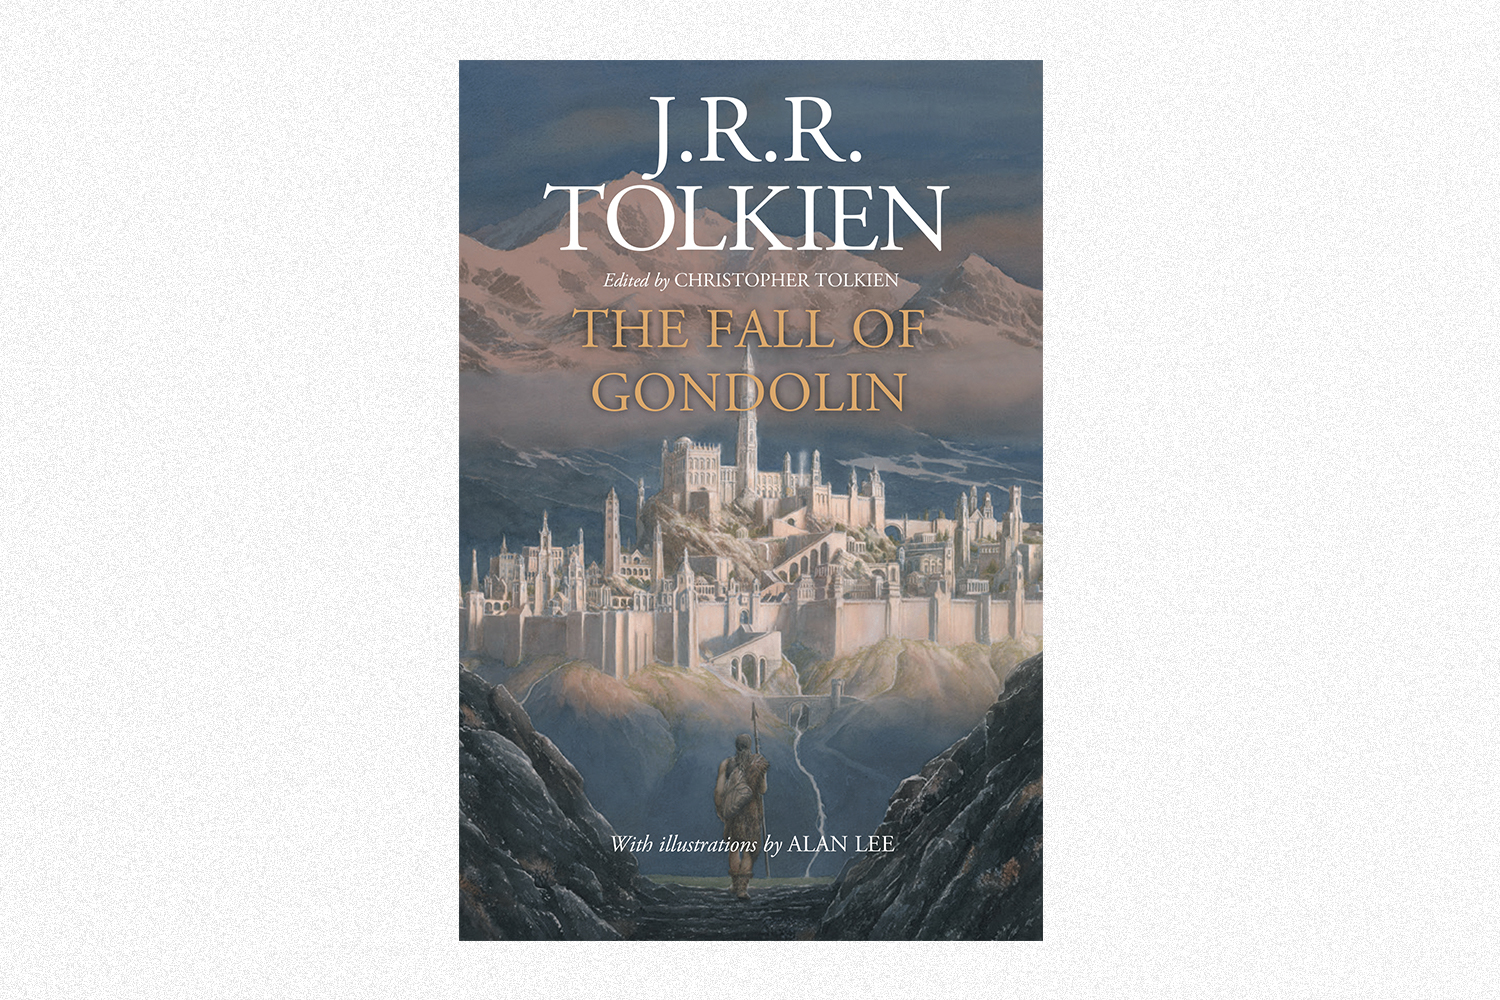 The book cover for The Fall of Gondolin by J.R.R. Tolkien 